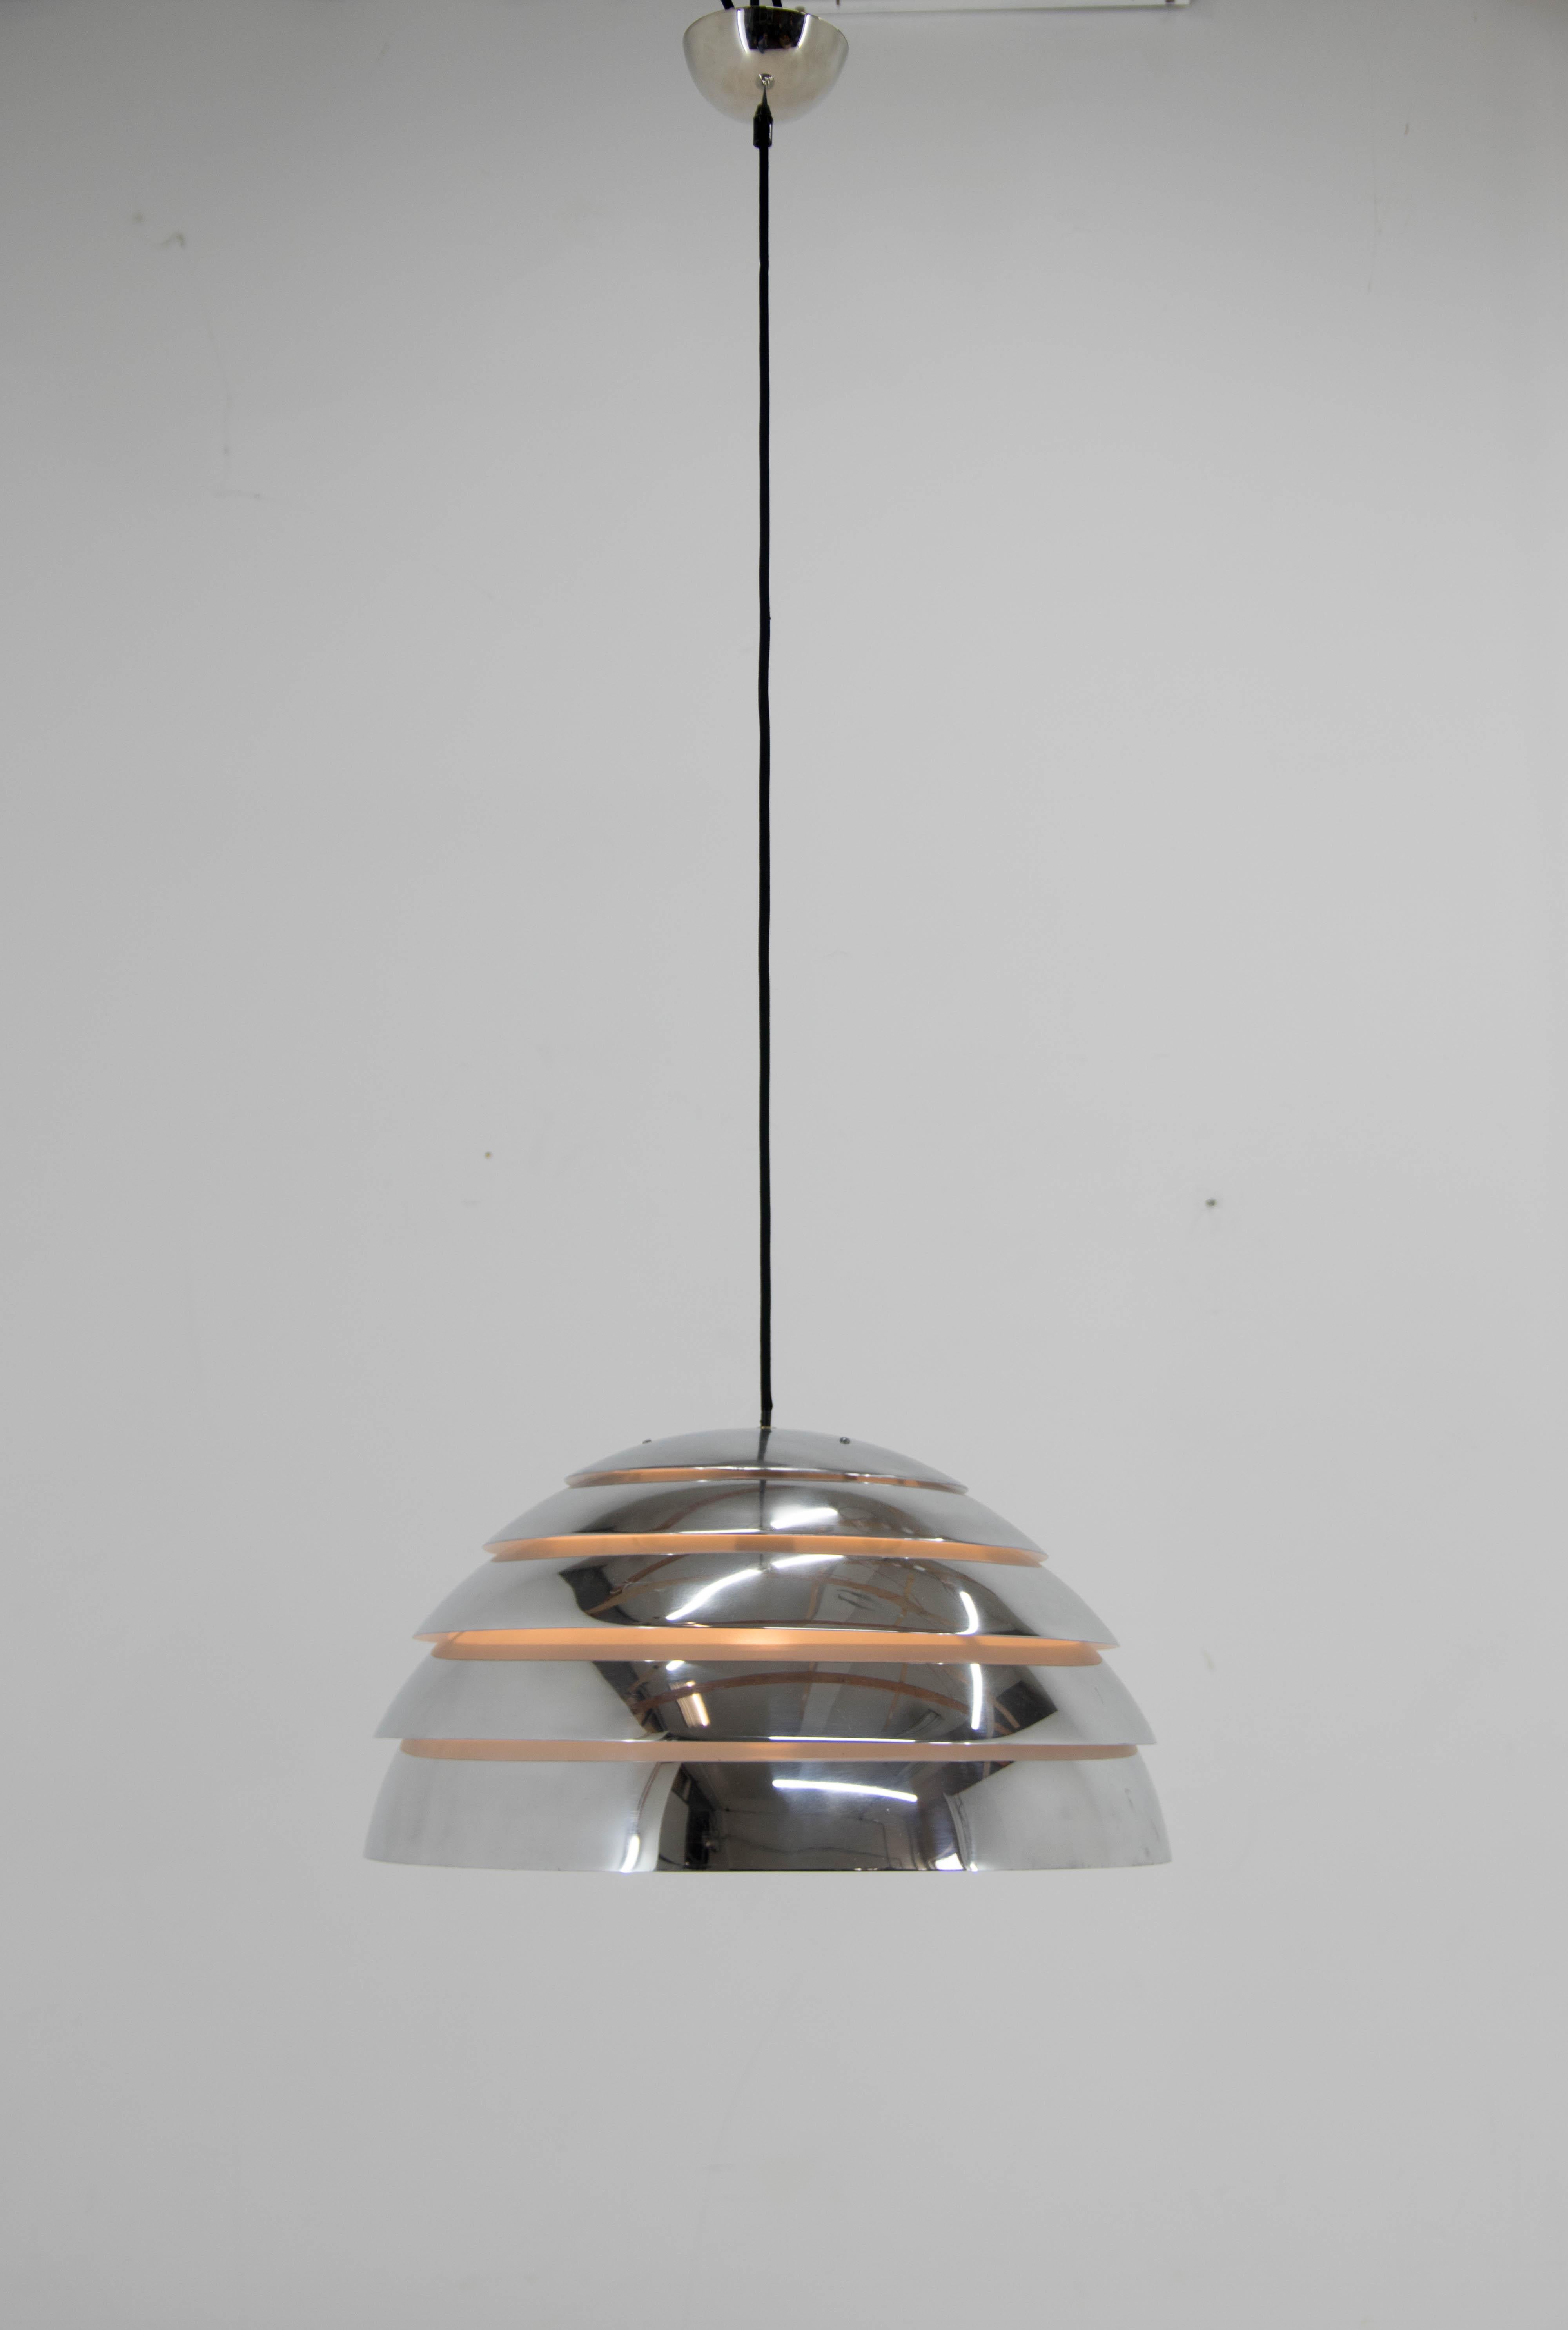 Pendant lamp designed by Hans-Agne Jakobsson for the Swedish company AB Markaryd.
Very good condition, aluminum polished, new white paint inside.
Rewired.
1x60W, E25-E27 bulb.
US wiring compatible.